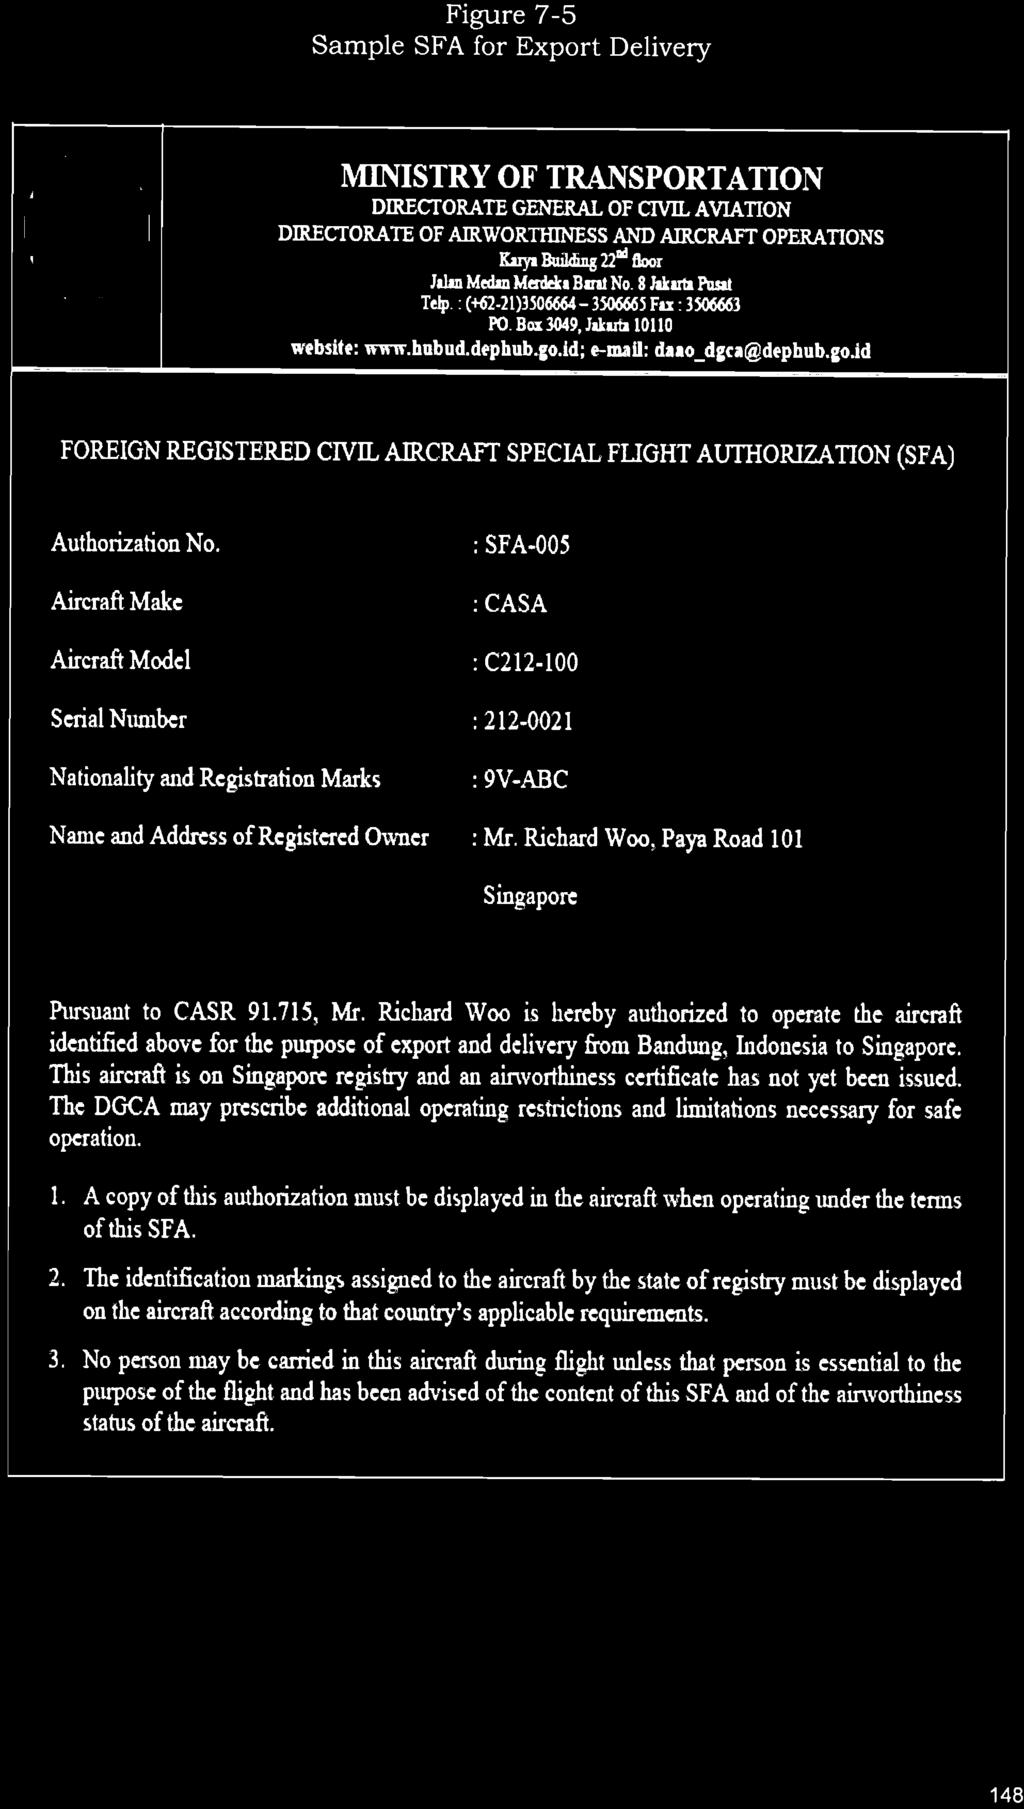 Figure 7-5 Sample SFA for Export Delivery MINISTRY OF TRANSPORTATION DIRECTORATE GENERAL OF CIVIL AVIATION DIRECTORATE OF AIRWORTHINESS AND AIRCRAFT OPERATIONS Karya Bulling 22nd floor Jalan